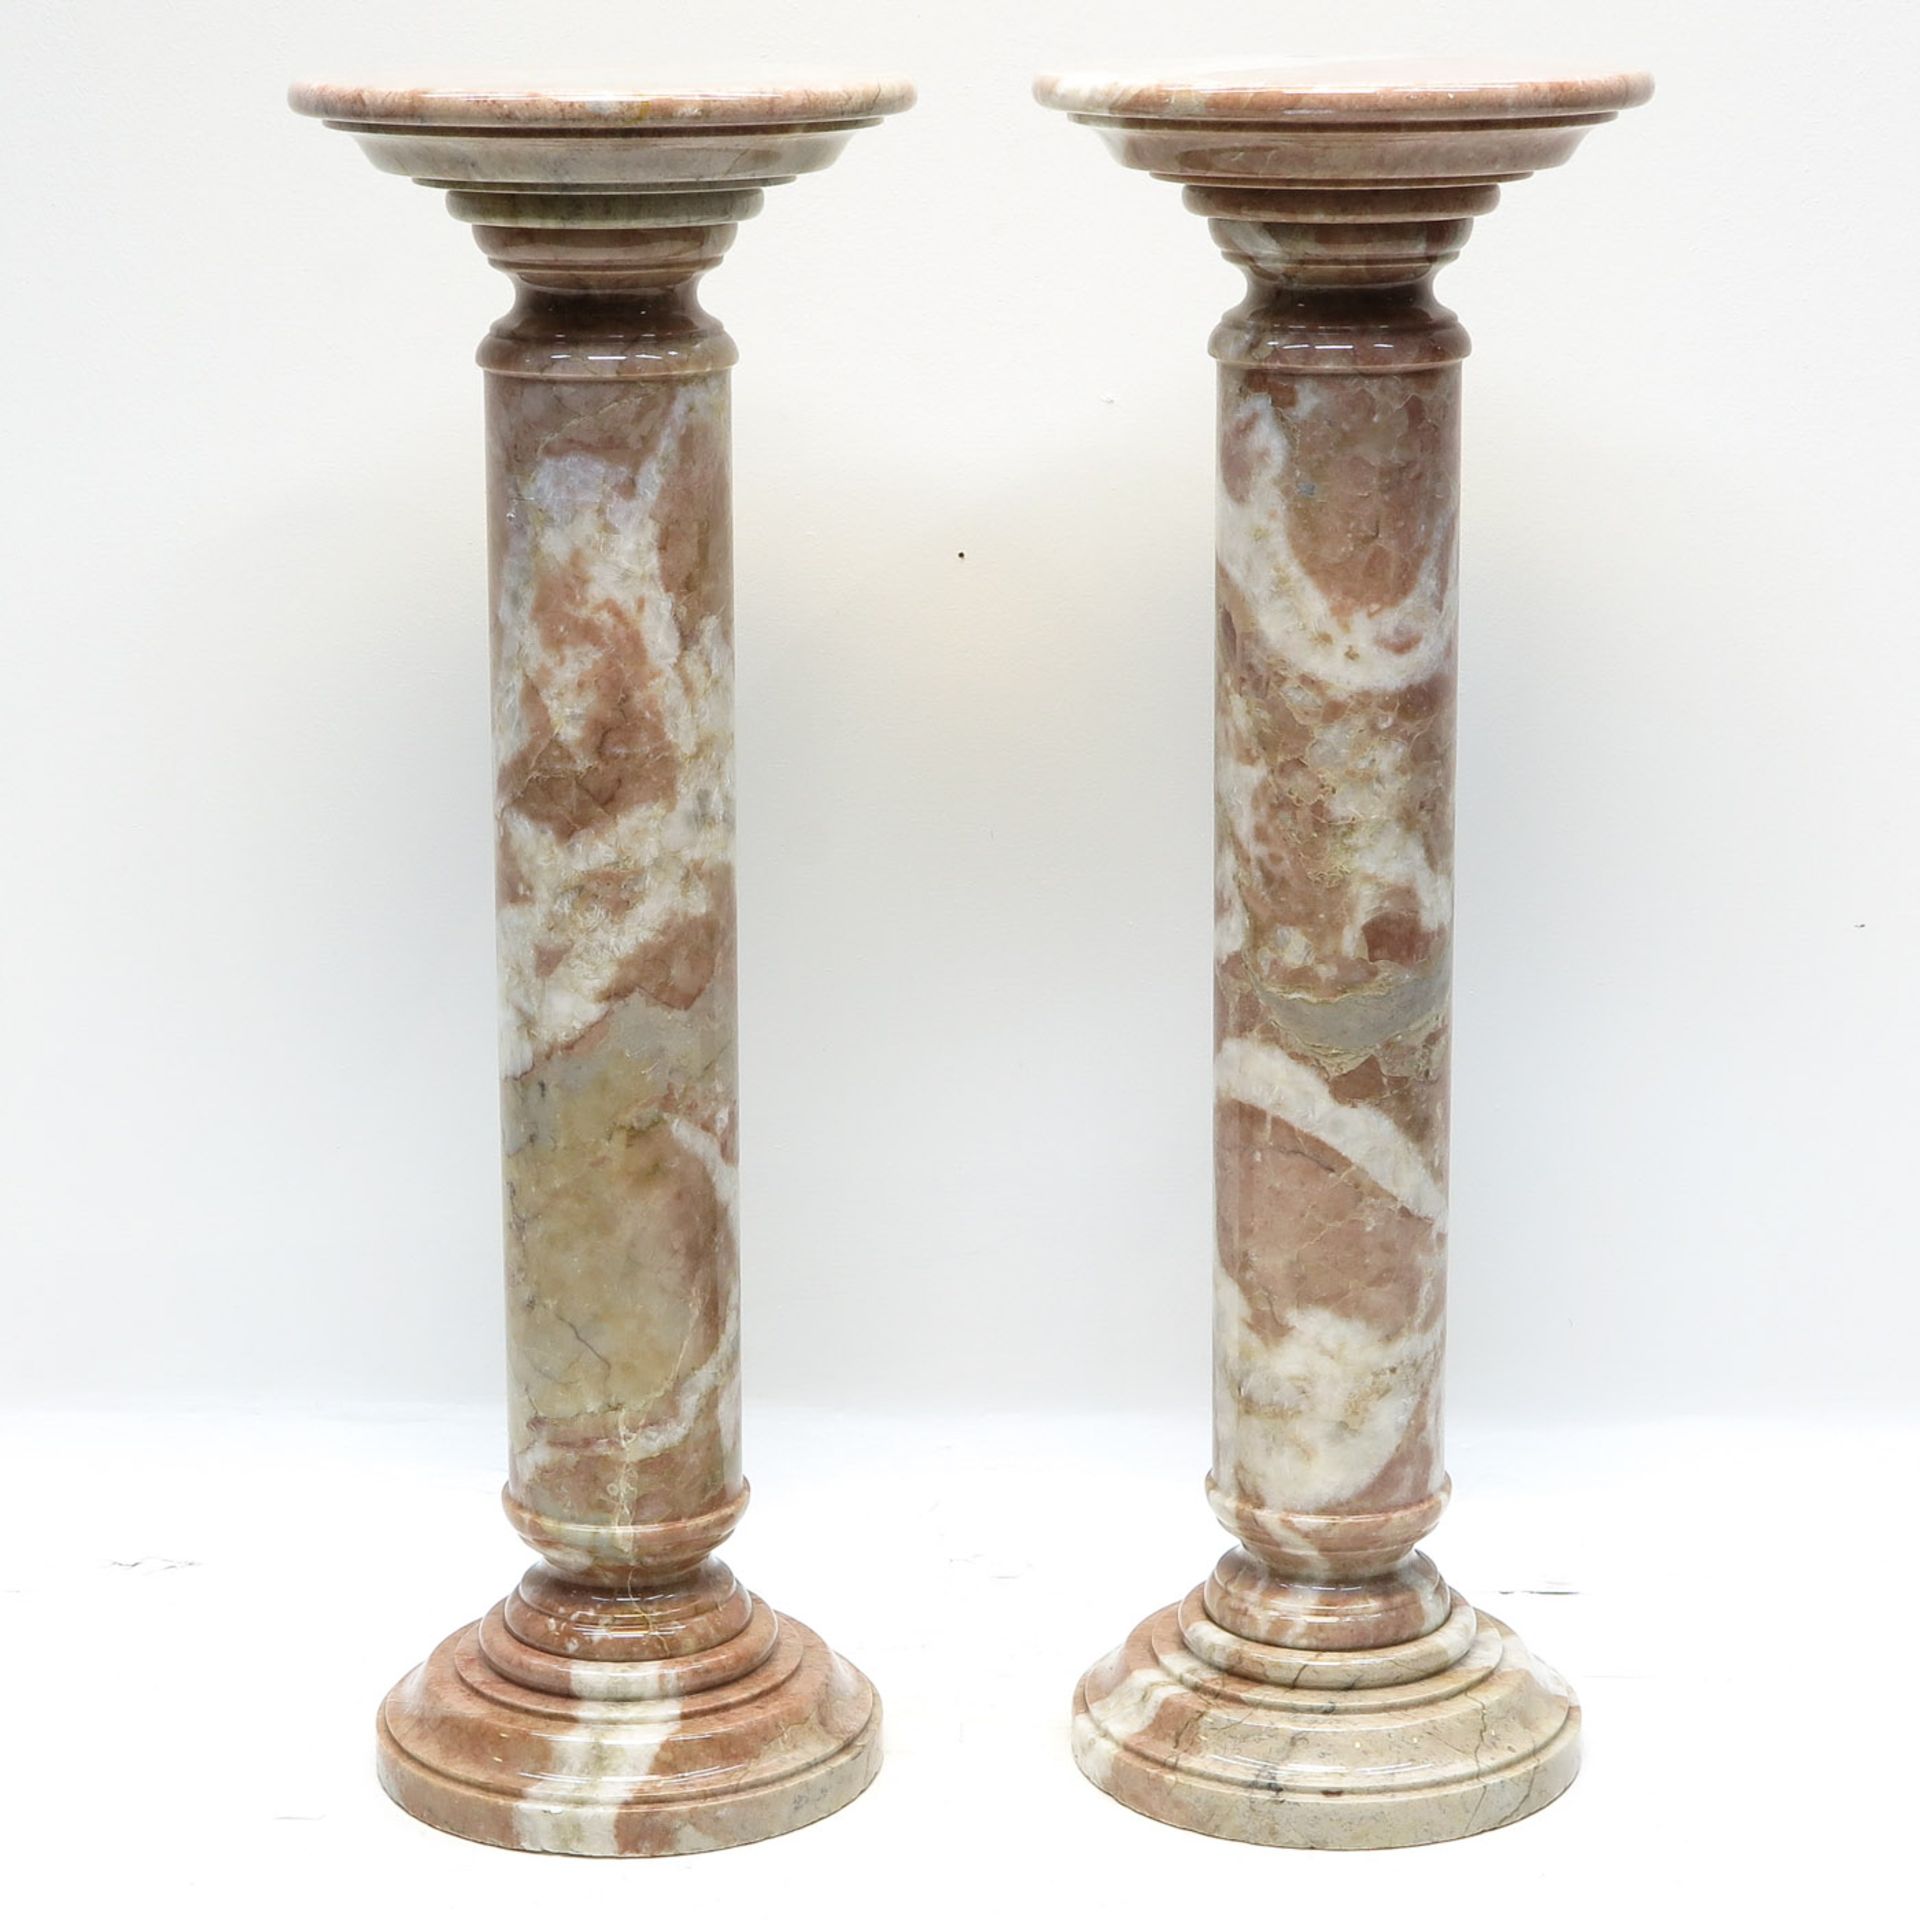 A Pair of Marble Pedestals - Image 4 of 7